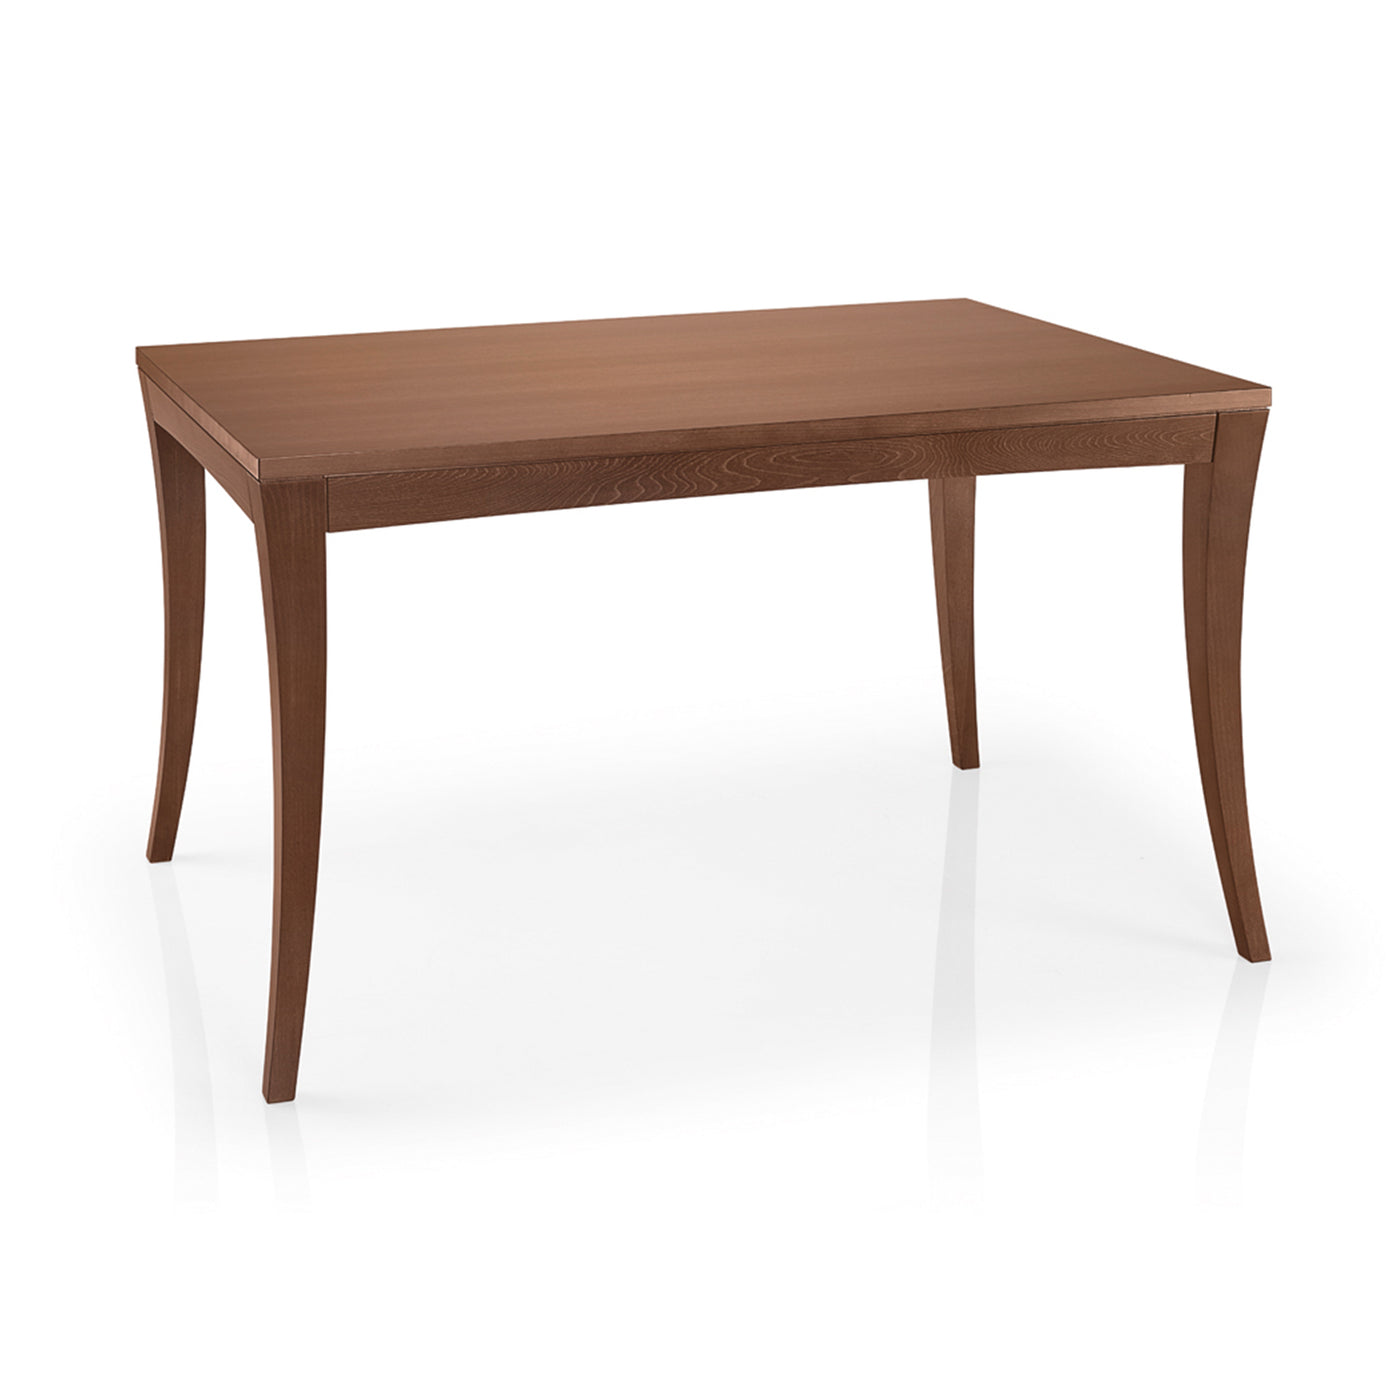 Justus Dining Table RT